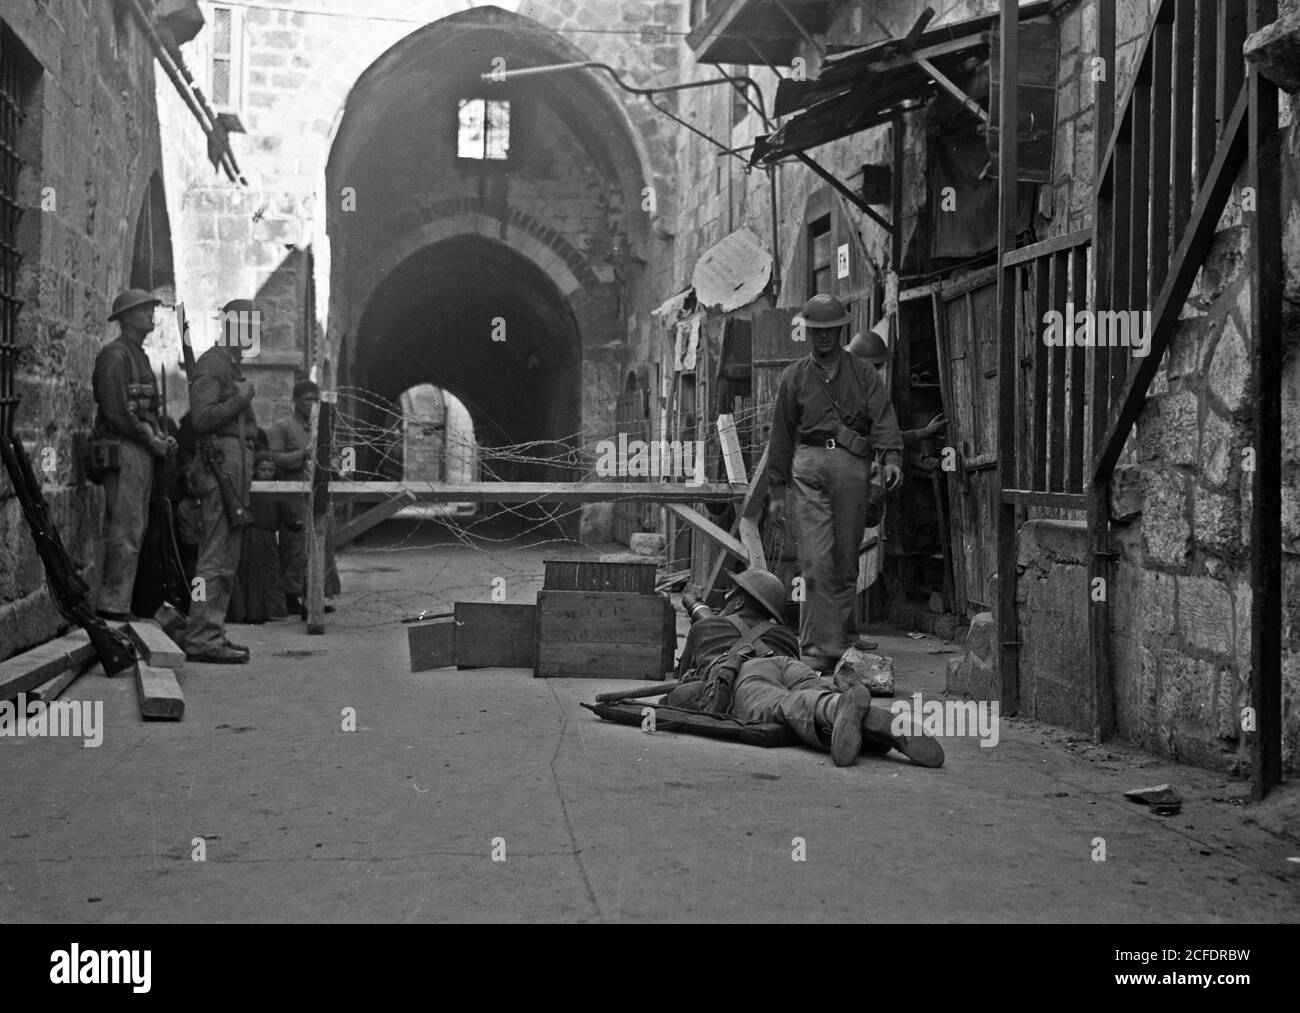 Original Caption:  The raising of the siege of Jerusalem. Typical scene of troops in Old City before the lifting of curfew. War-like scene in Bab el-Silseleh quarter with machine-gun in foreground entrance to Mosque grounds in distance  - Location: Jerusalem ca.  1938 Stock Photo